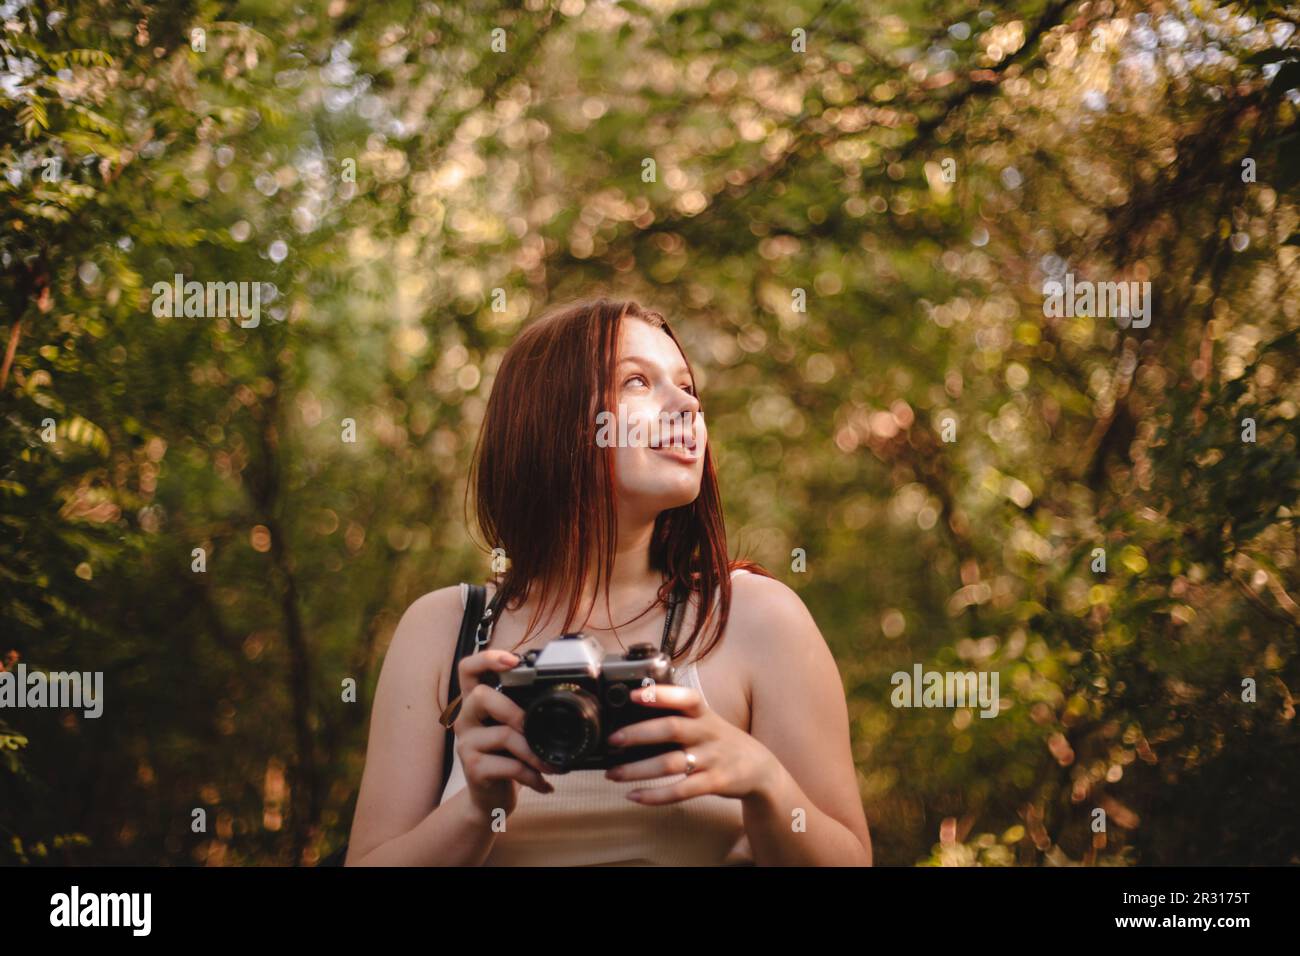 Young woman holding camera in forest Stock Photo